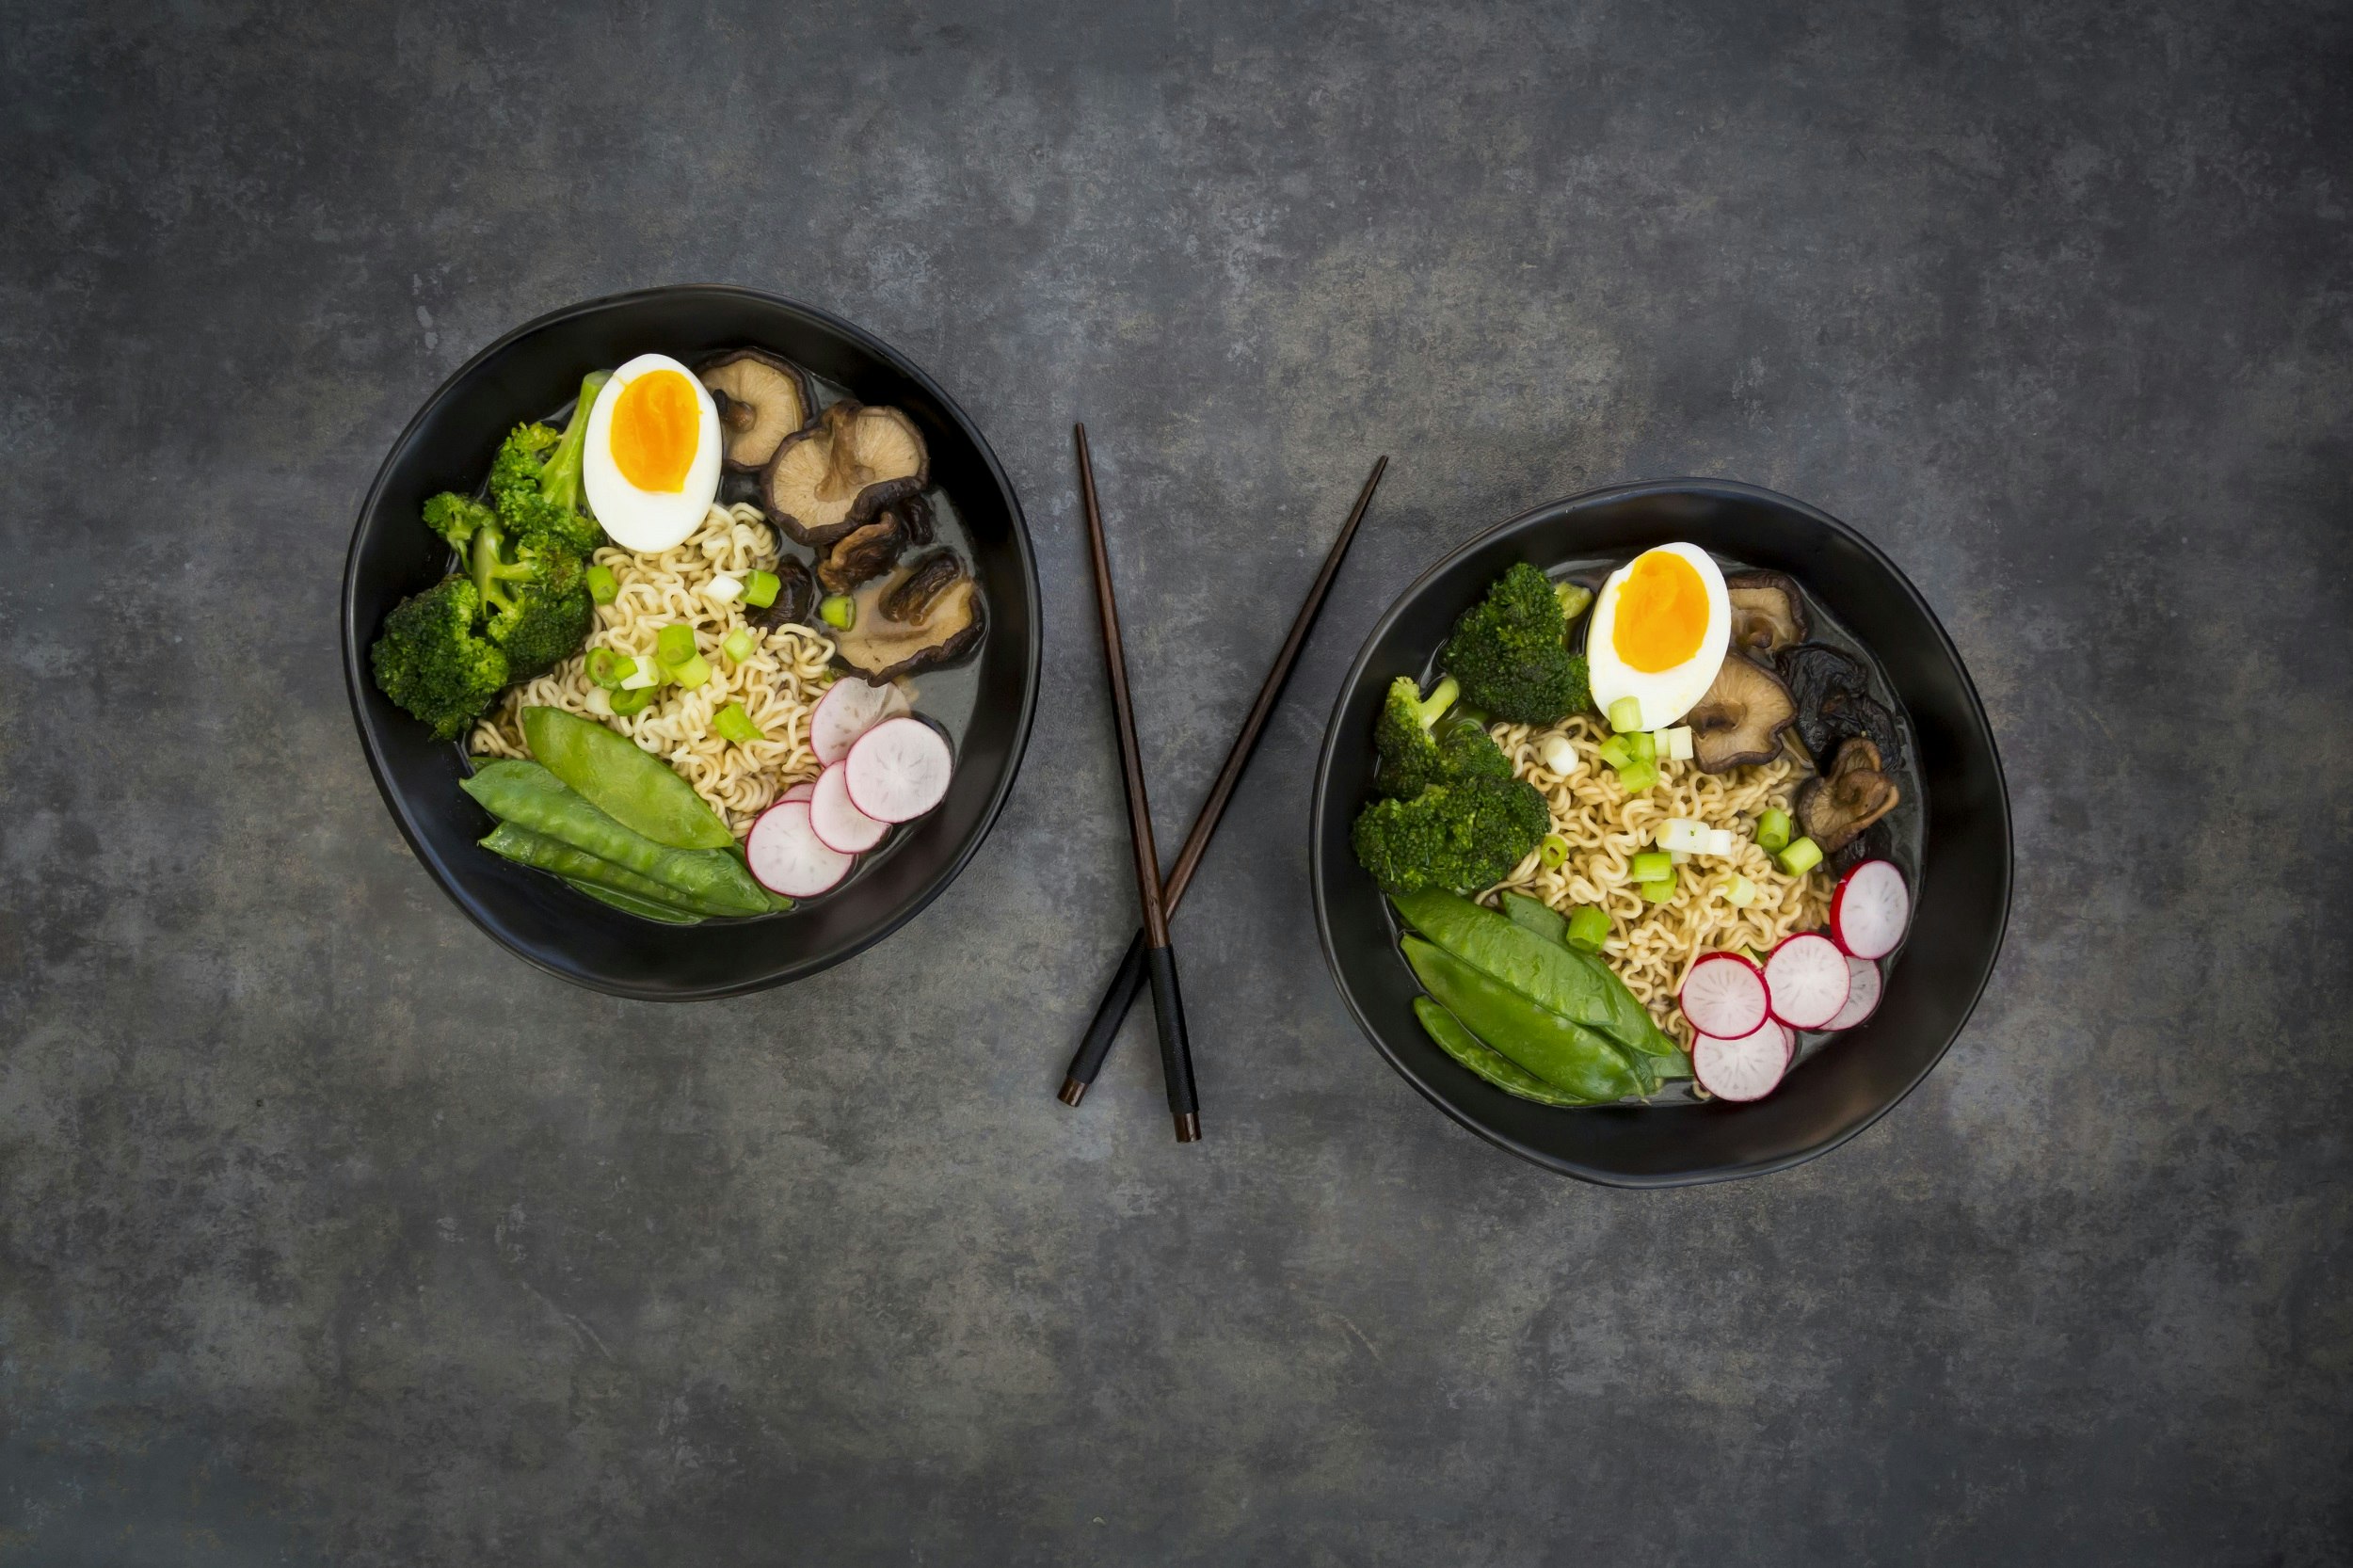 Two black bowls sit on a polished concrete counter, separated by dark brown chopsticks; within each bowl are neatly placed piles of ramen noodles, broccoli, sliced beets, pea pods, mushrooms and half a soft-boiled egg.